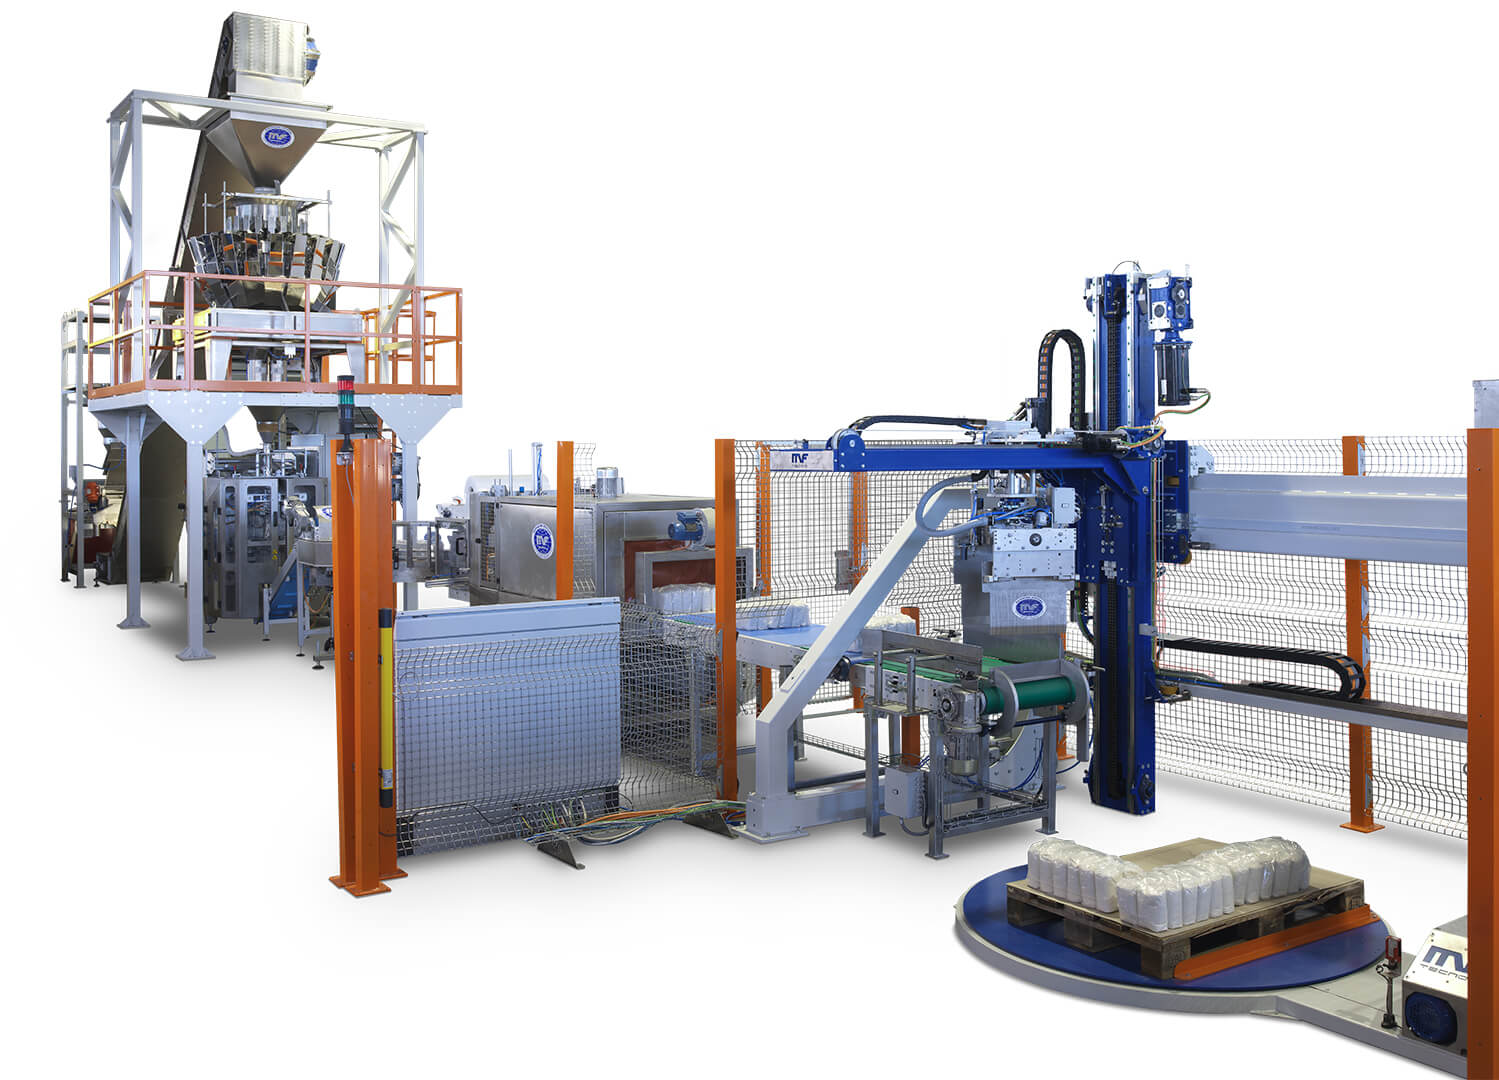 Sugar Packaging: When automation improves your work 1